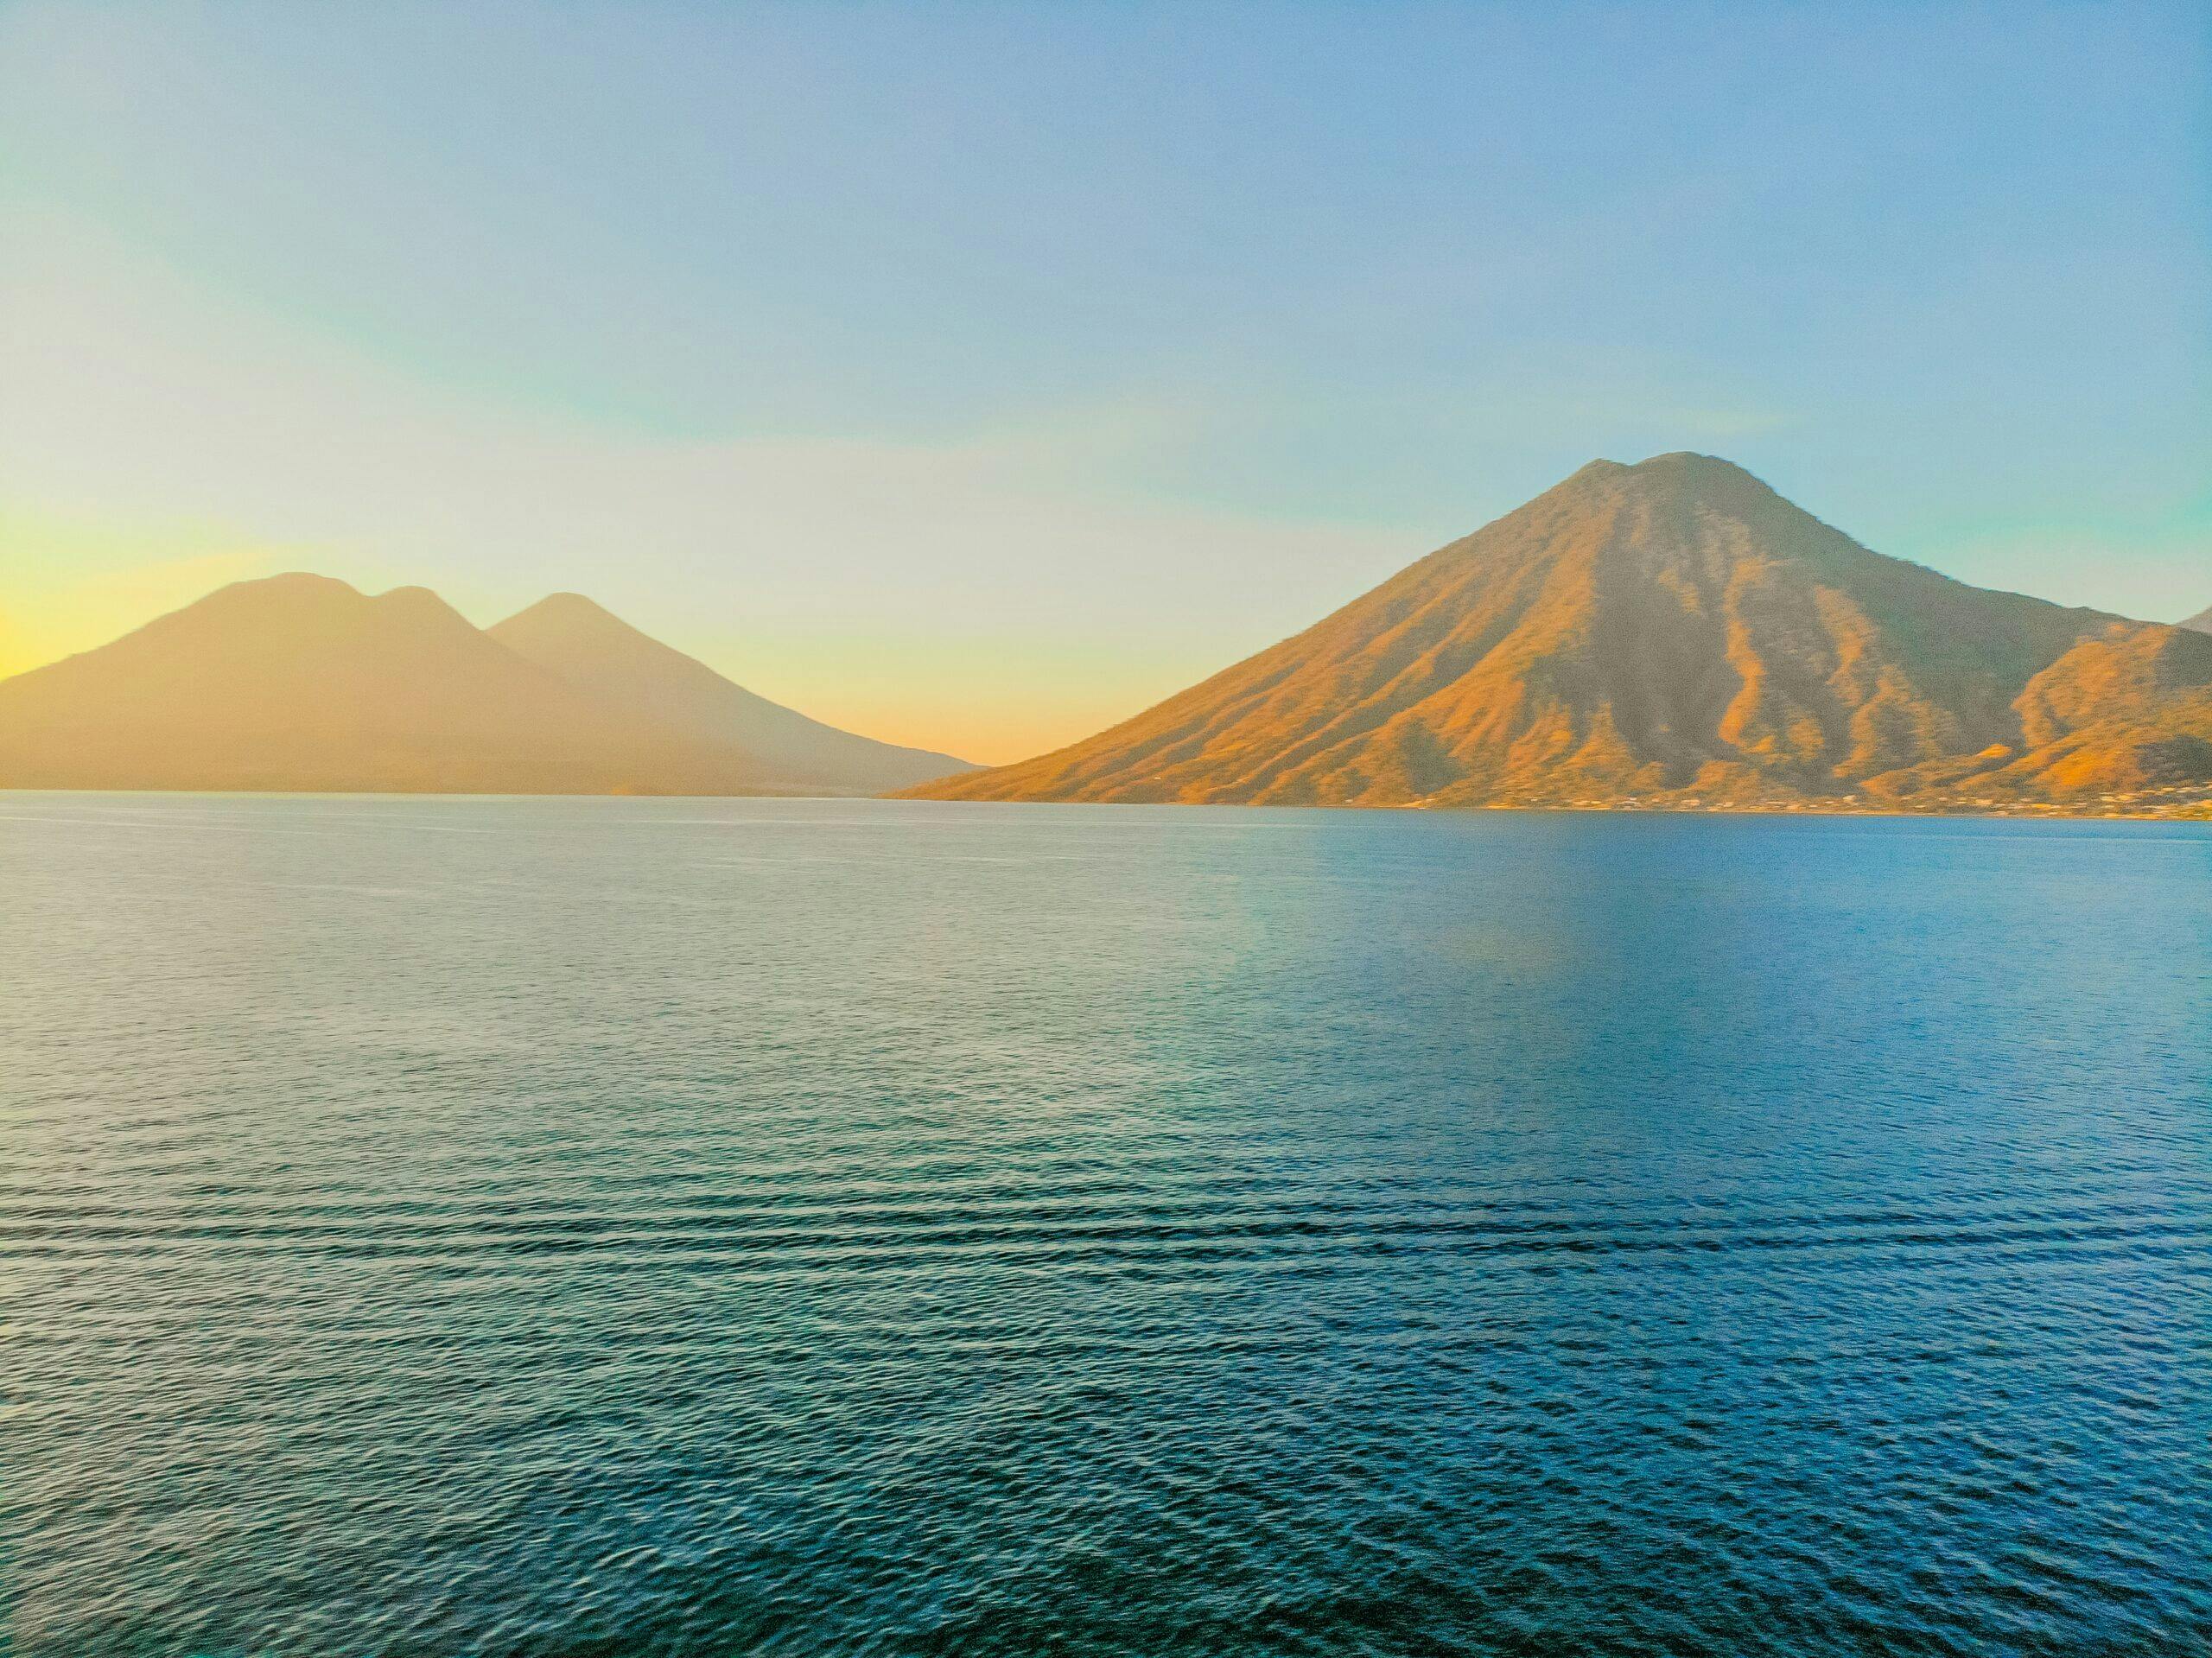 We're reimagining a fairer way to visit Guatemala